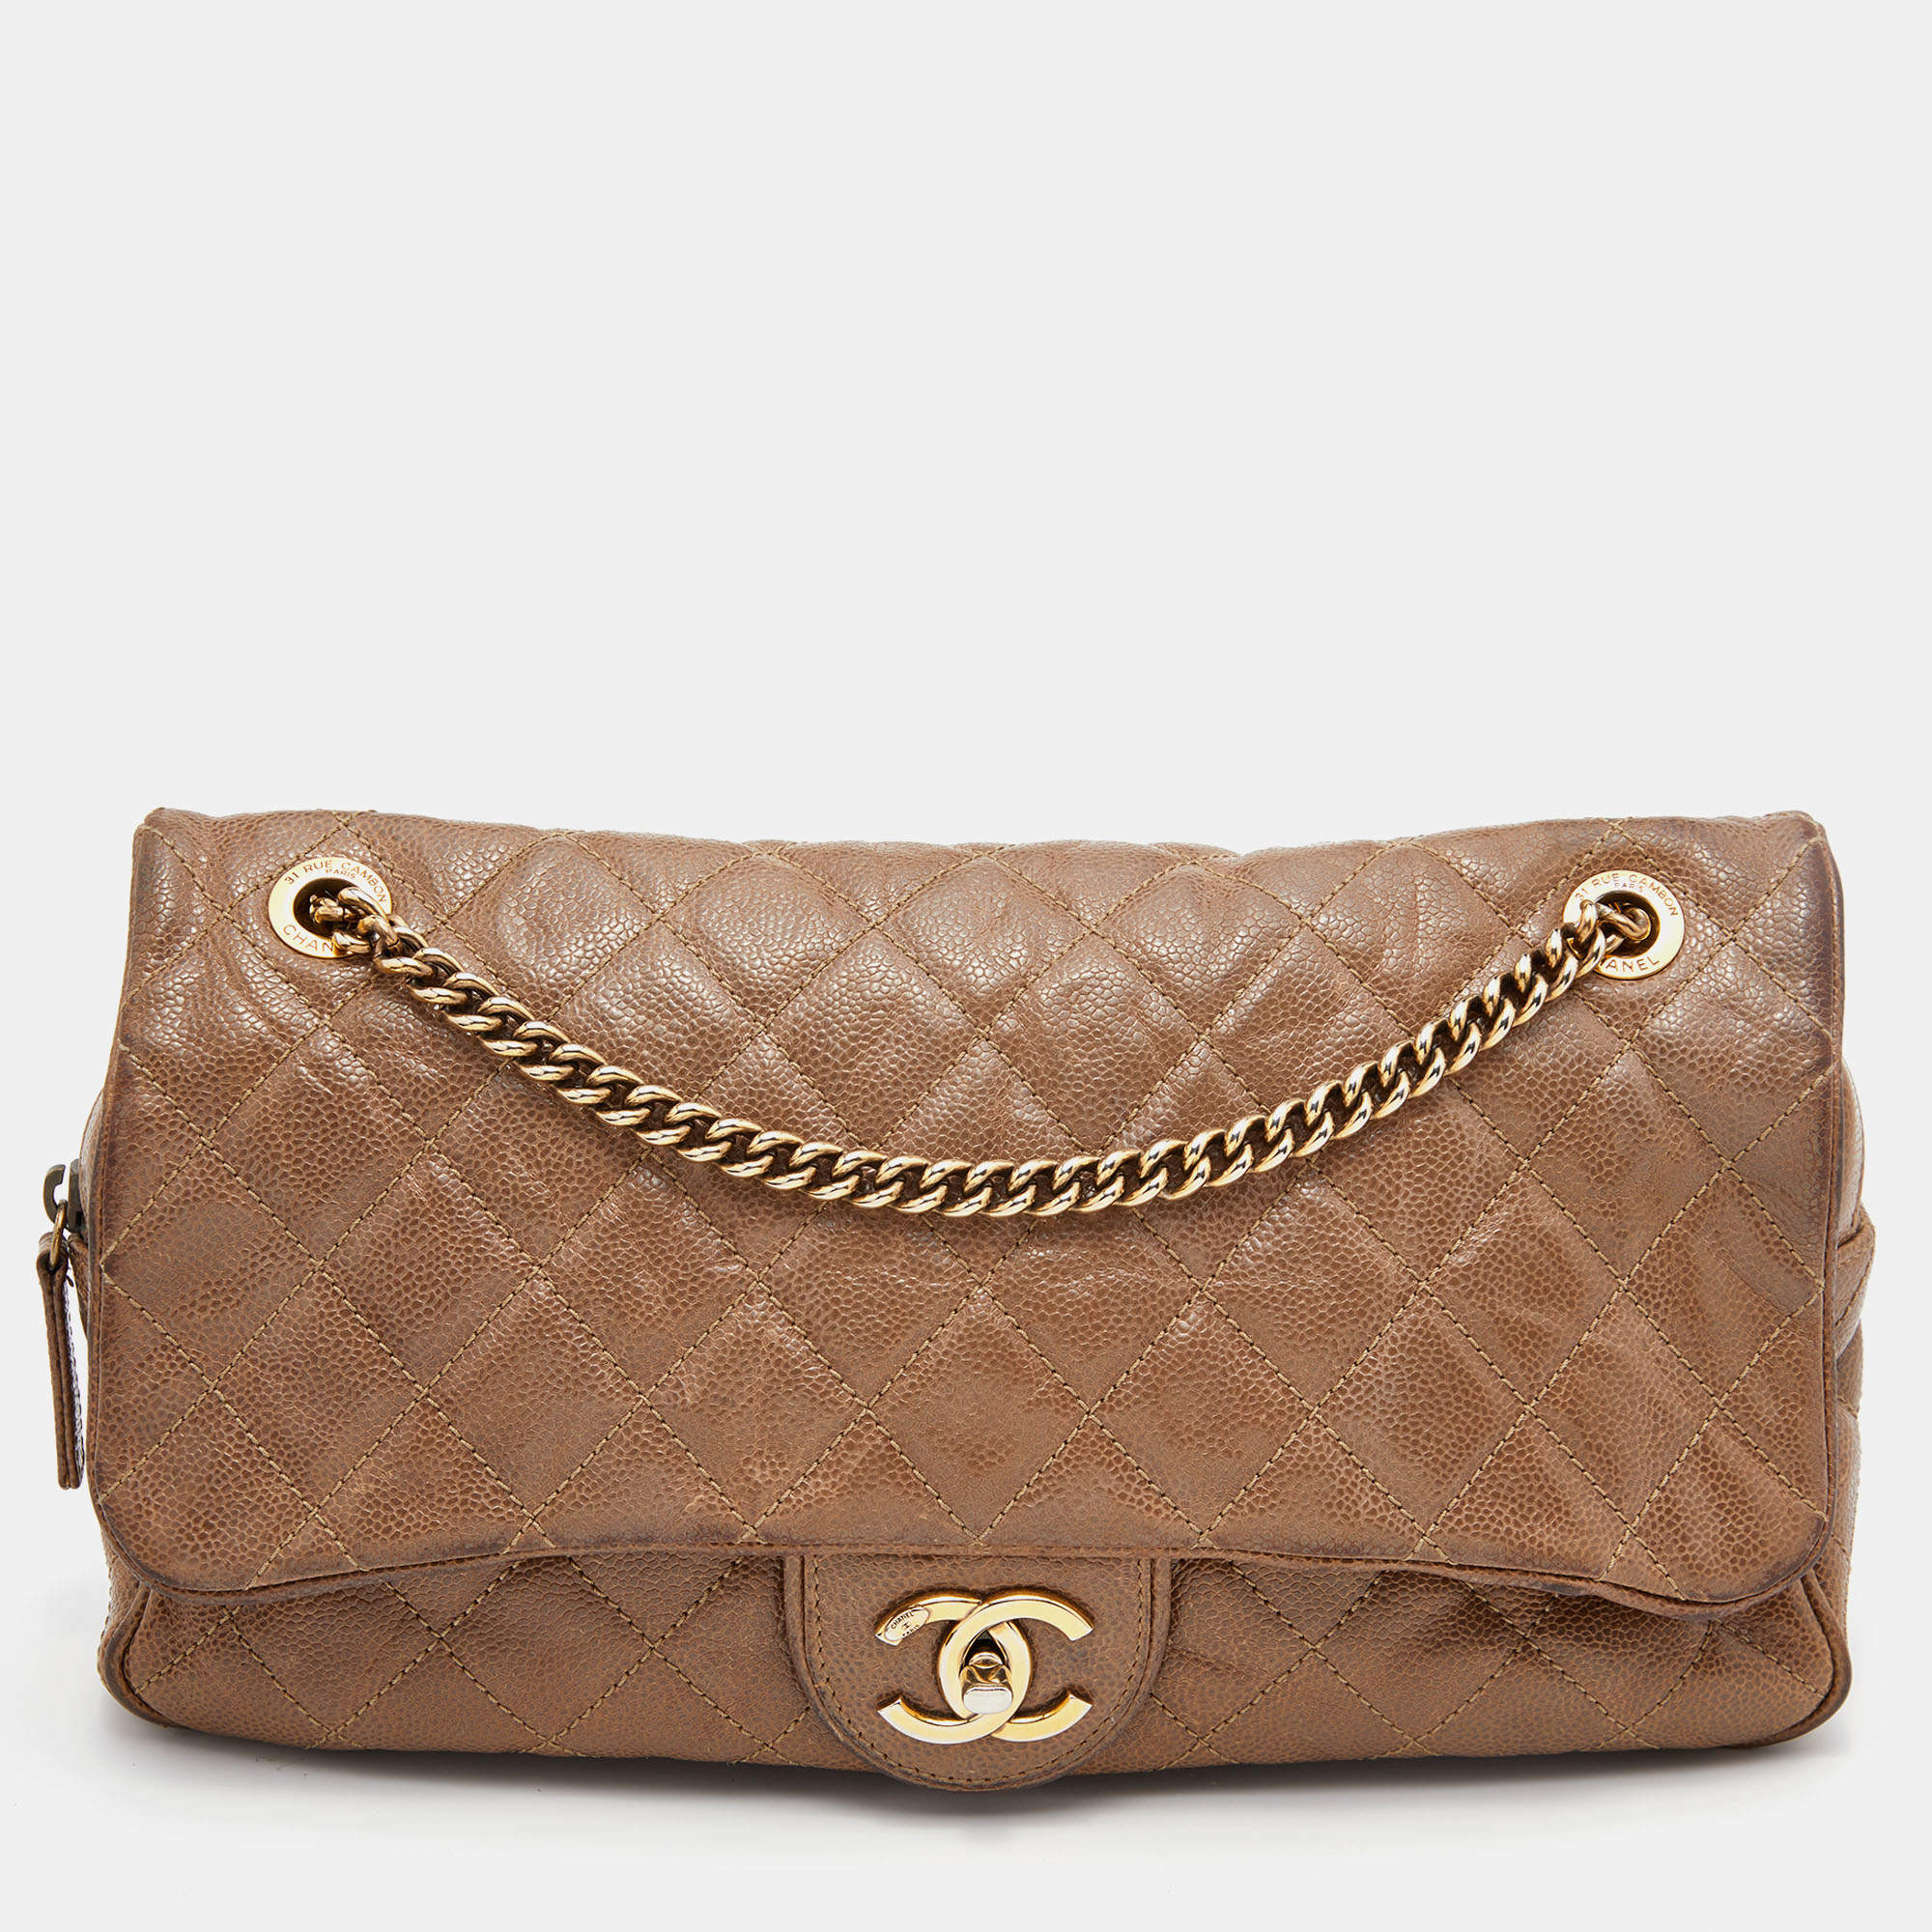 Chanel Brown Quilted Crumpled Caviar Leather Large Shiva Flap Bag Chanel